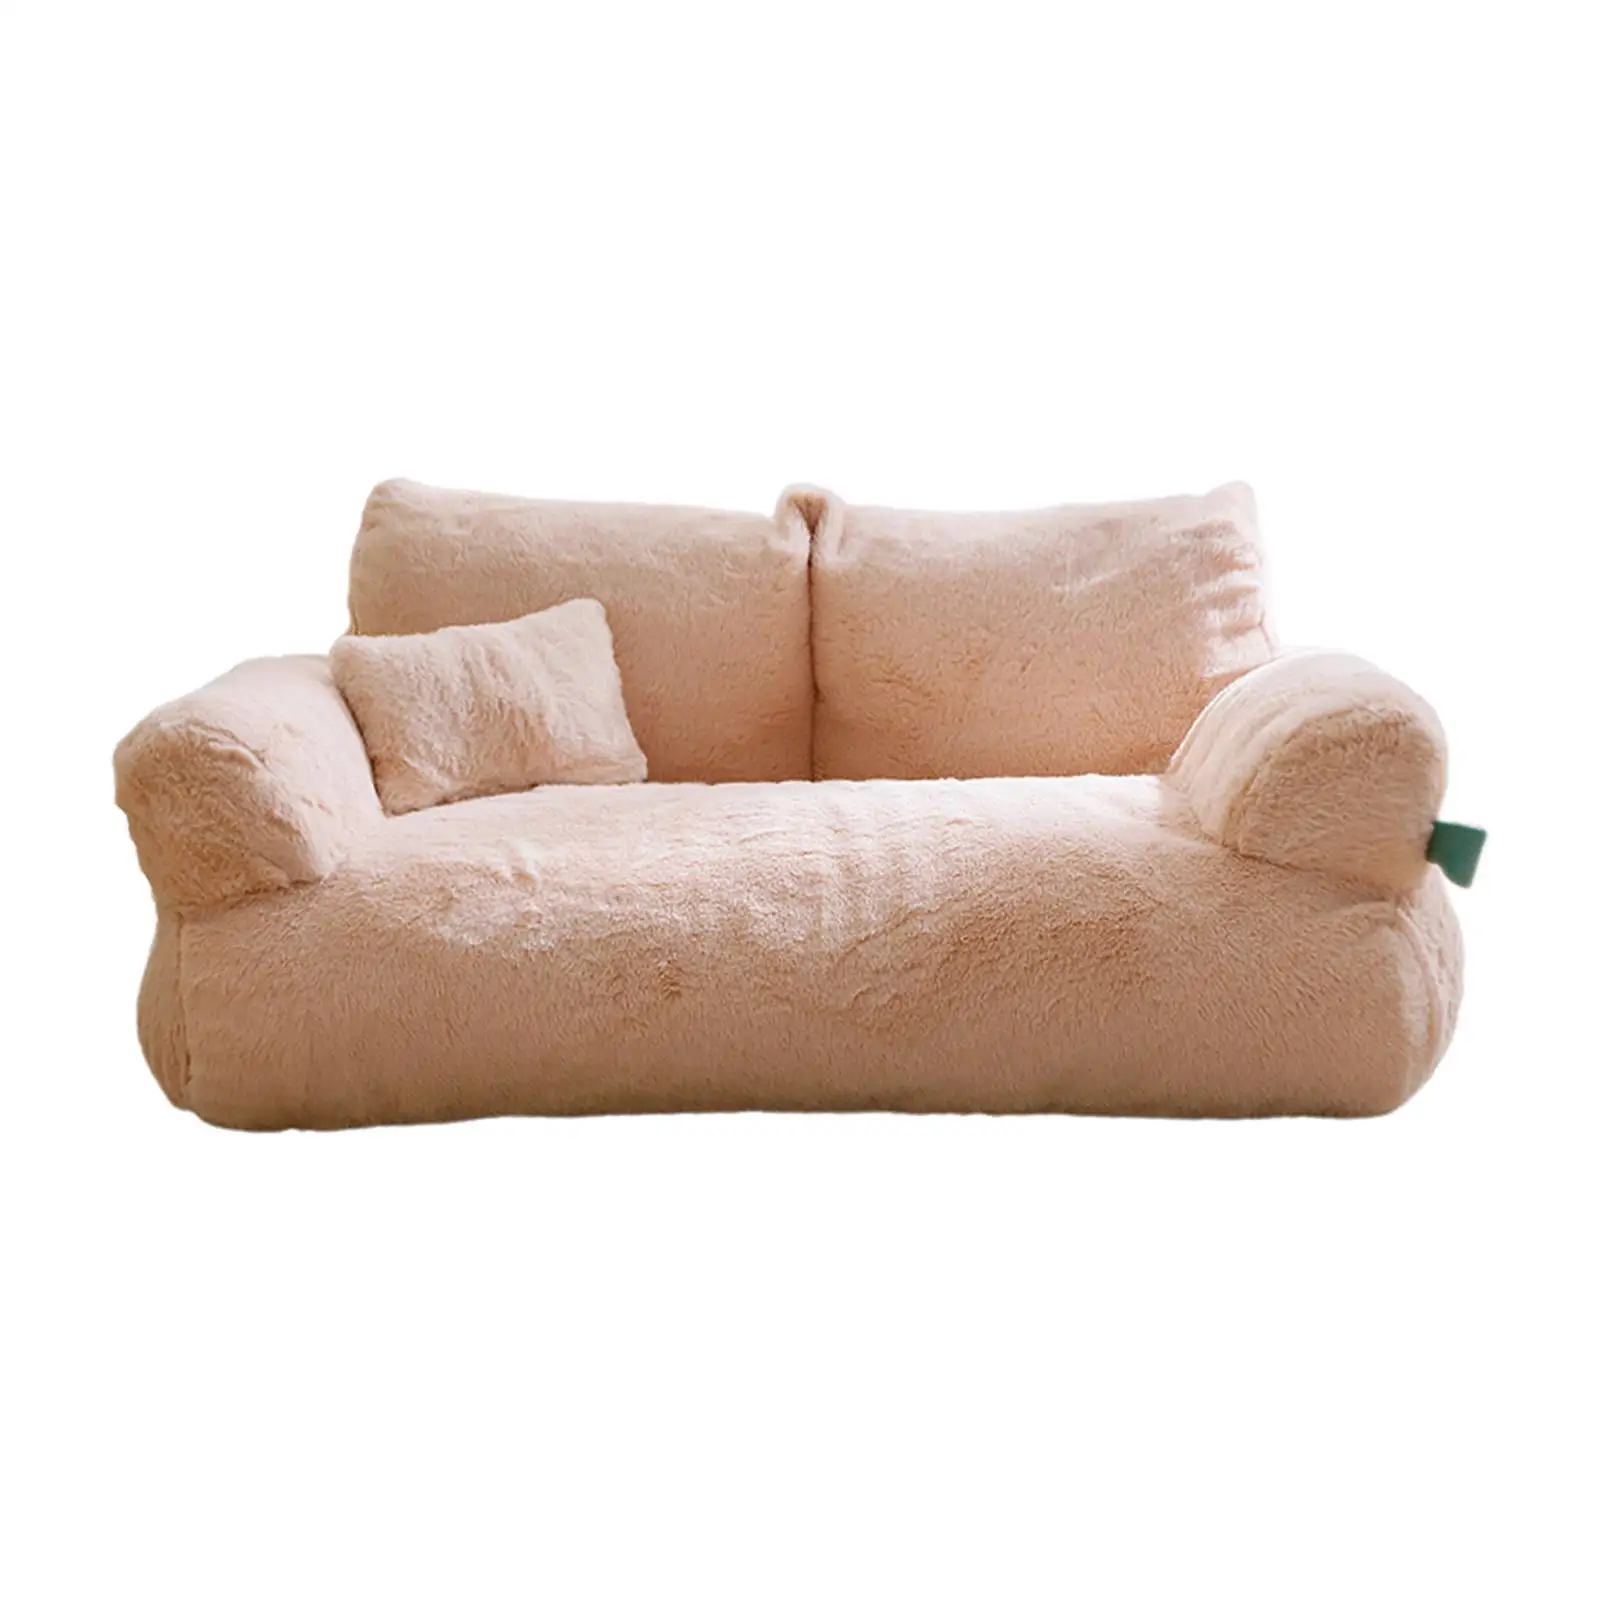 Cat Sofa Bed Cat Furniture Outdoor Detachable Cushion Home Decor Portable Cat House for Doggy Small Dogs Rabbit Playing Kitty